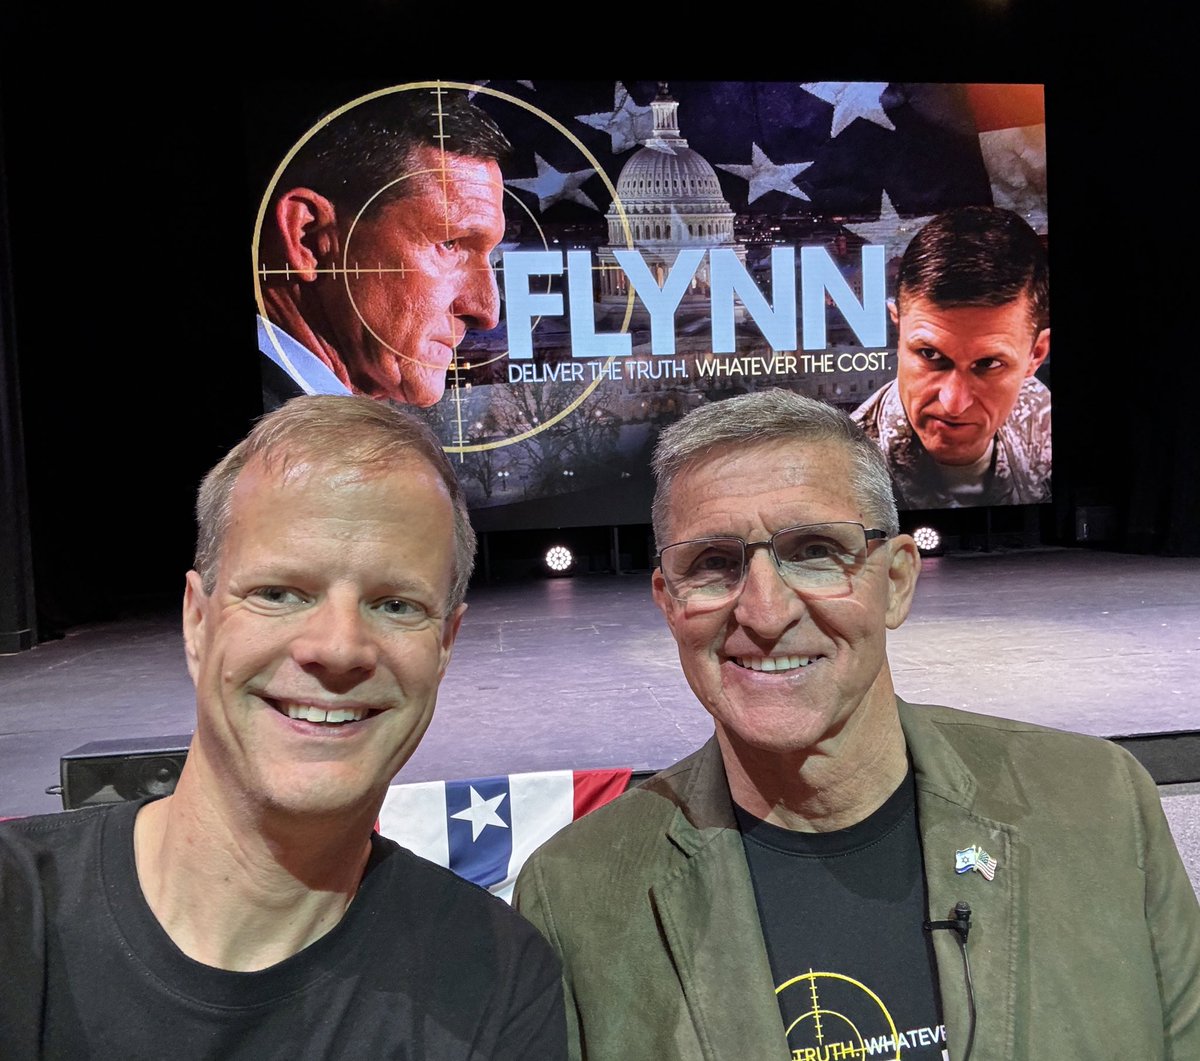 Over 600 tickets sold at the @FlynnMovie event last night in Live Oak, California. And NOW the @FlynnMovie is available on iTunes tv.apple.com/us/movie/flynn… and YouTube youtube.com/watch?v=pXHOnC… for rent and purchase. This tour has been so much fun traveling the country with